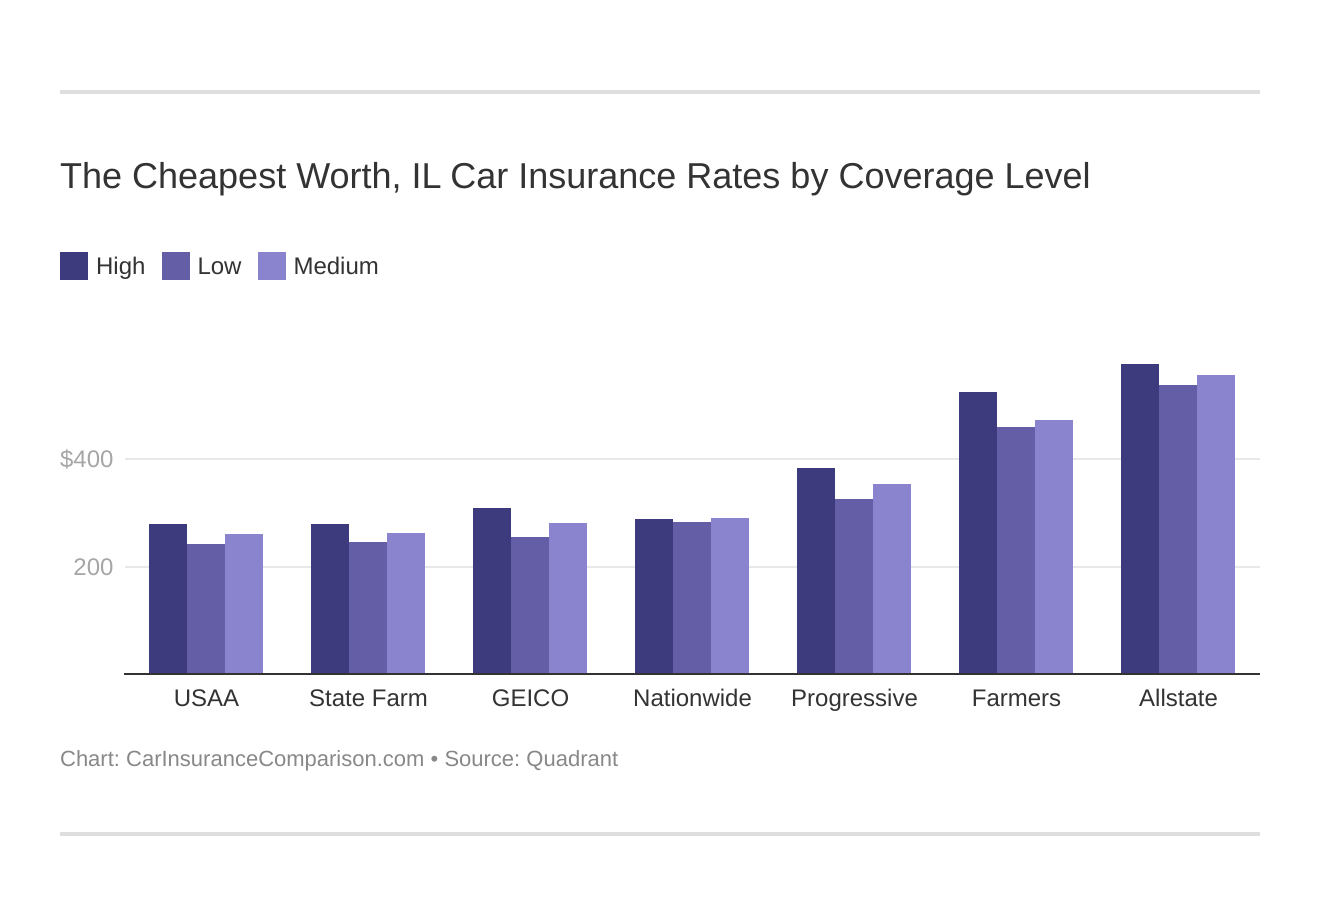 The Cheapest Worth, IL Car Insurance Rates by Coverage Level